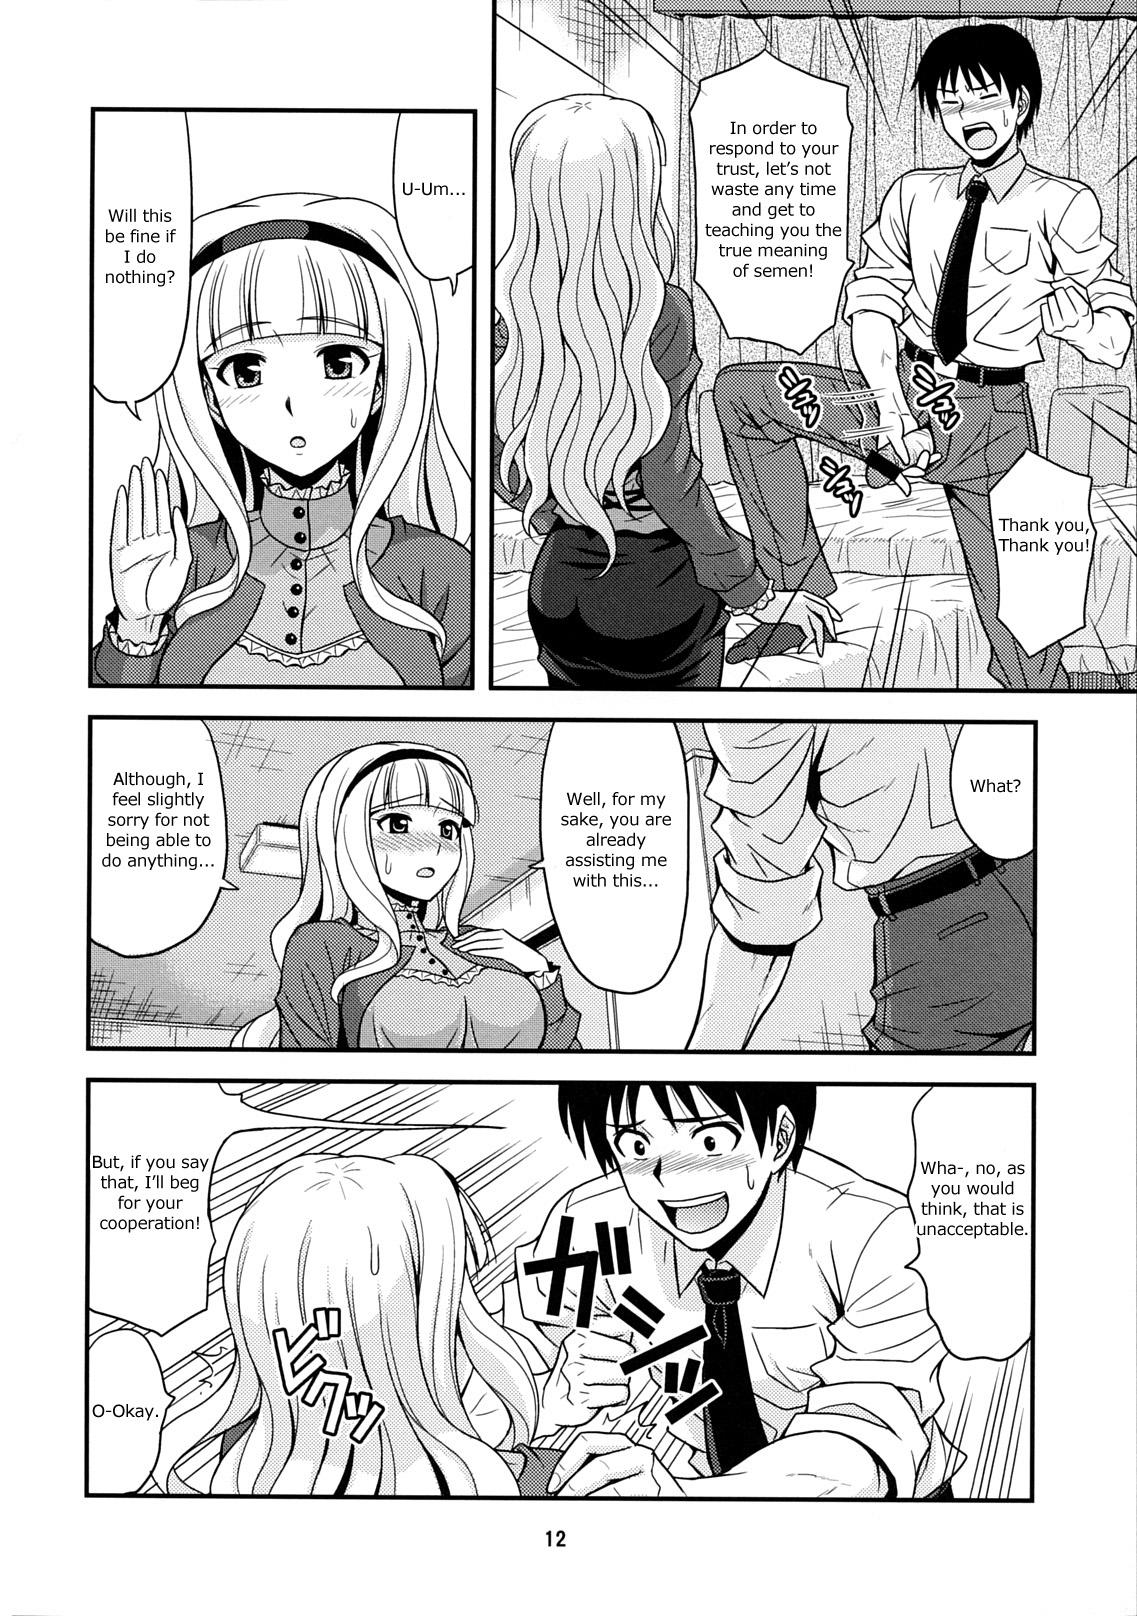 Real Amature Porn Moonlight Princess - The idolmaster Clothed Sex - Page 11